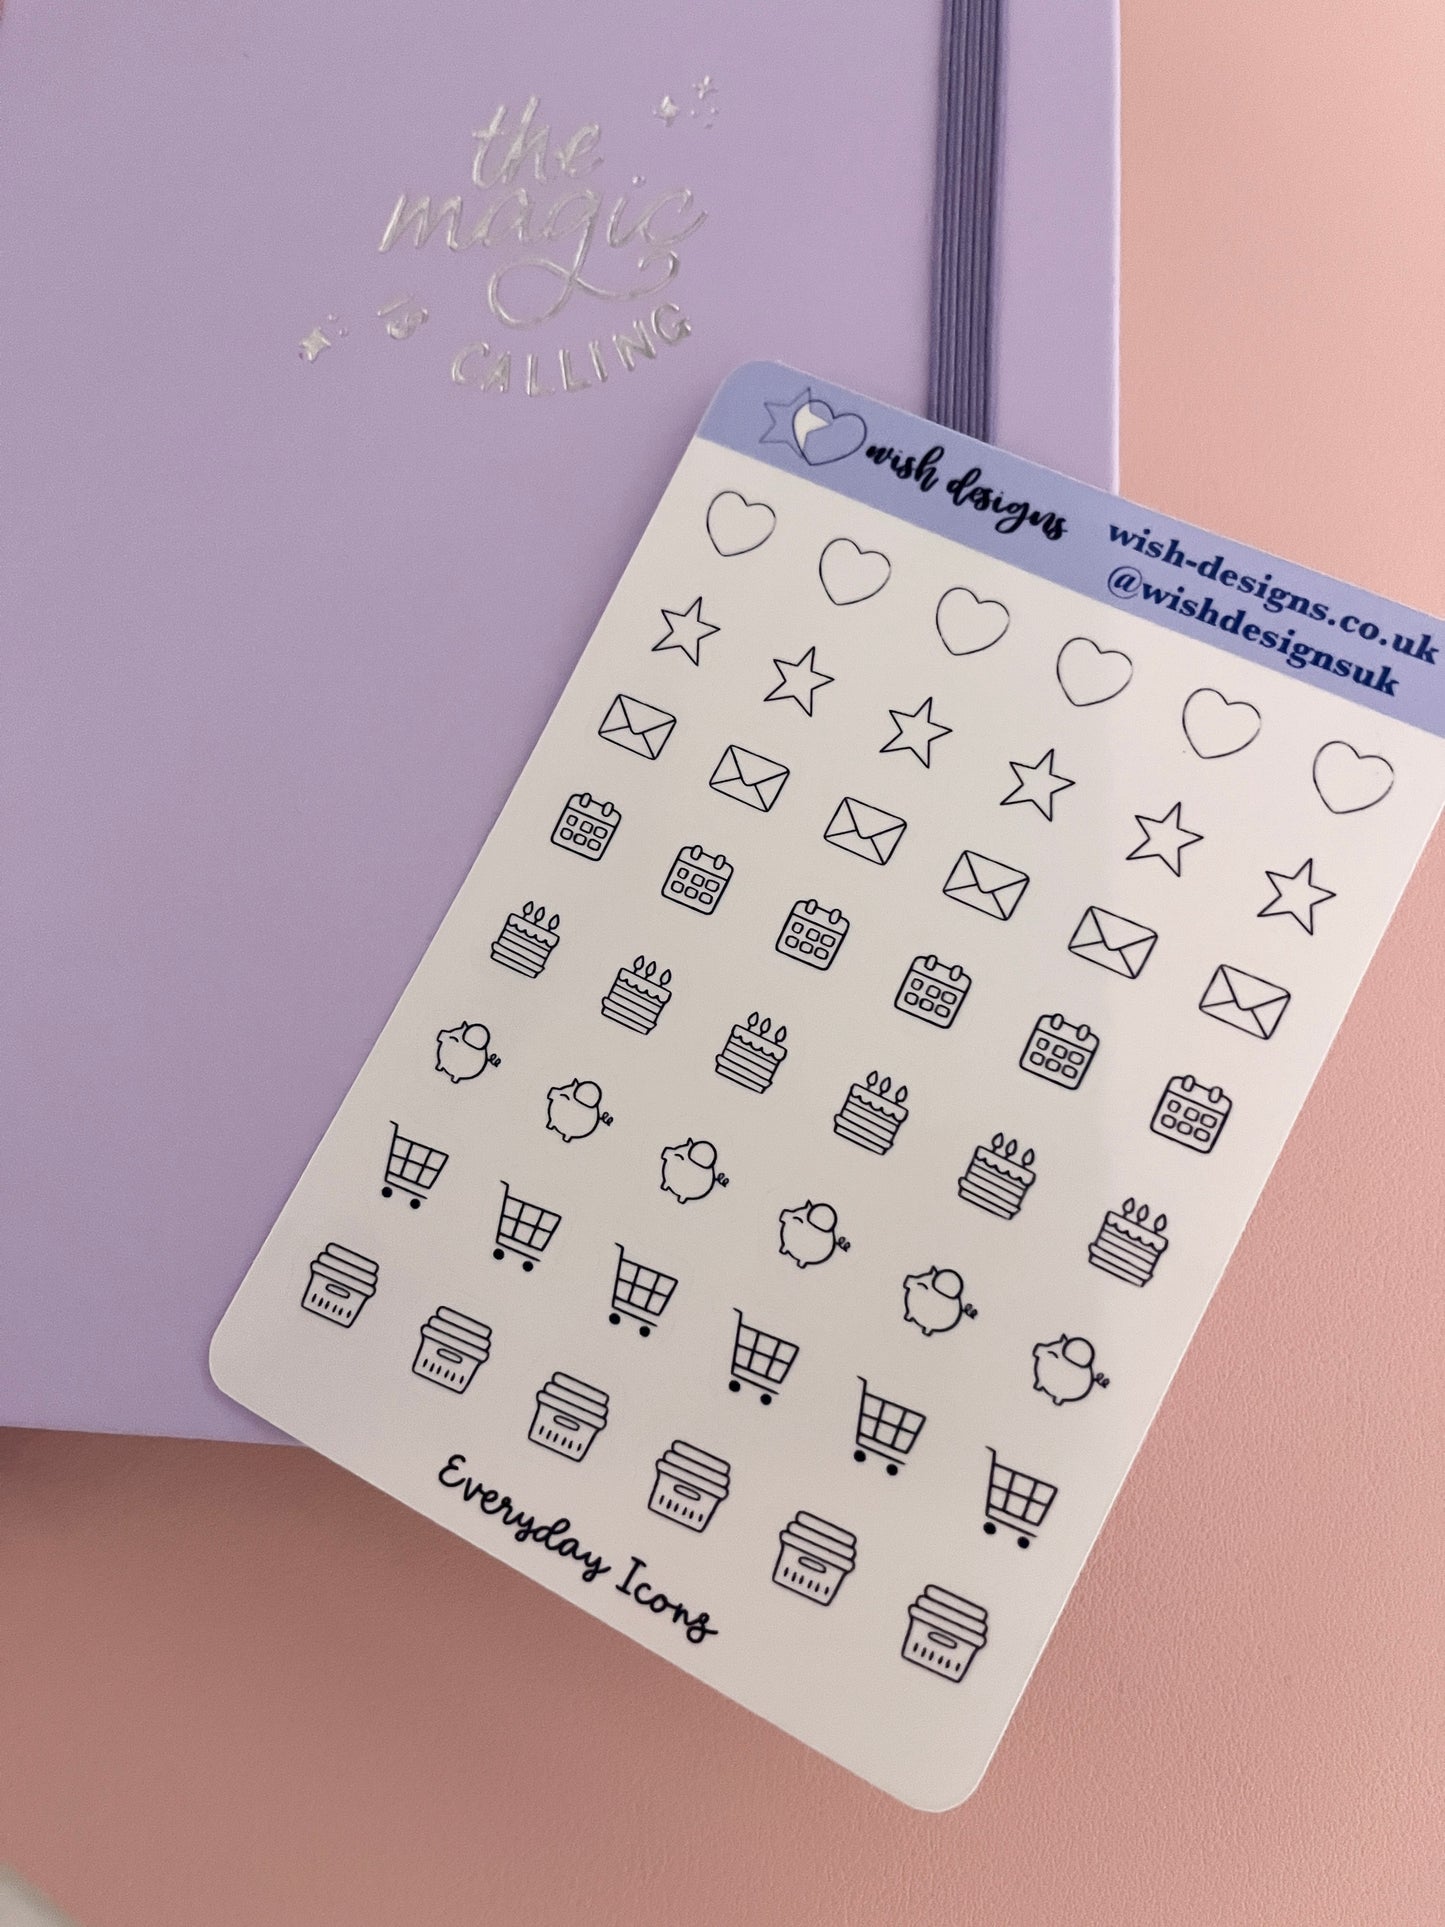 Everyday Icons Clear Sticker Sheet